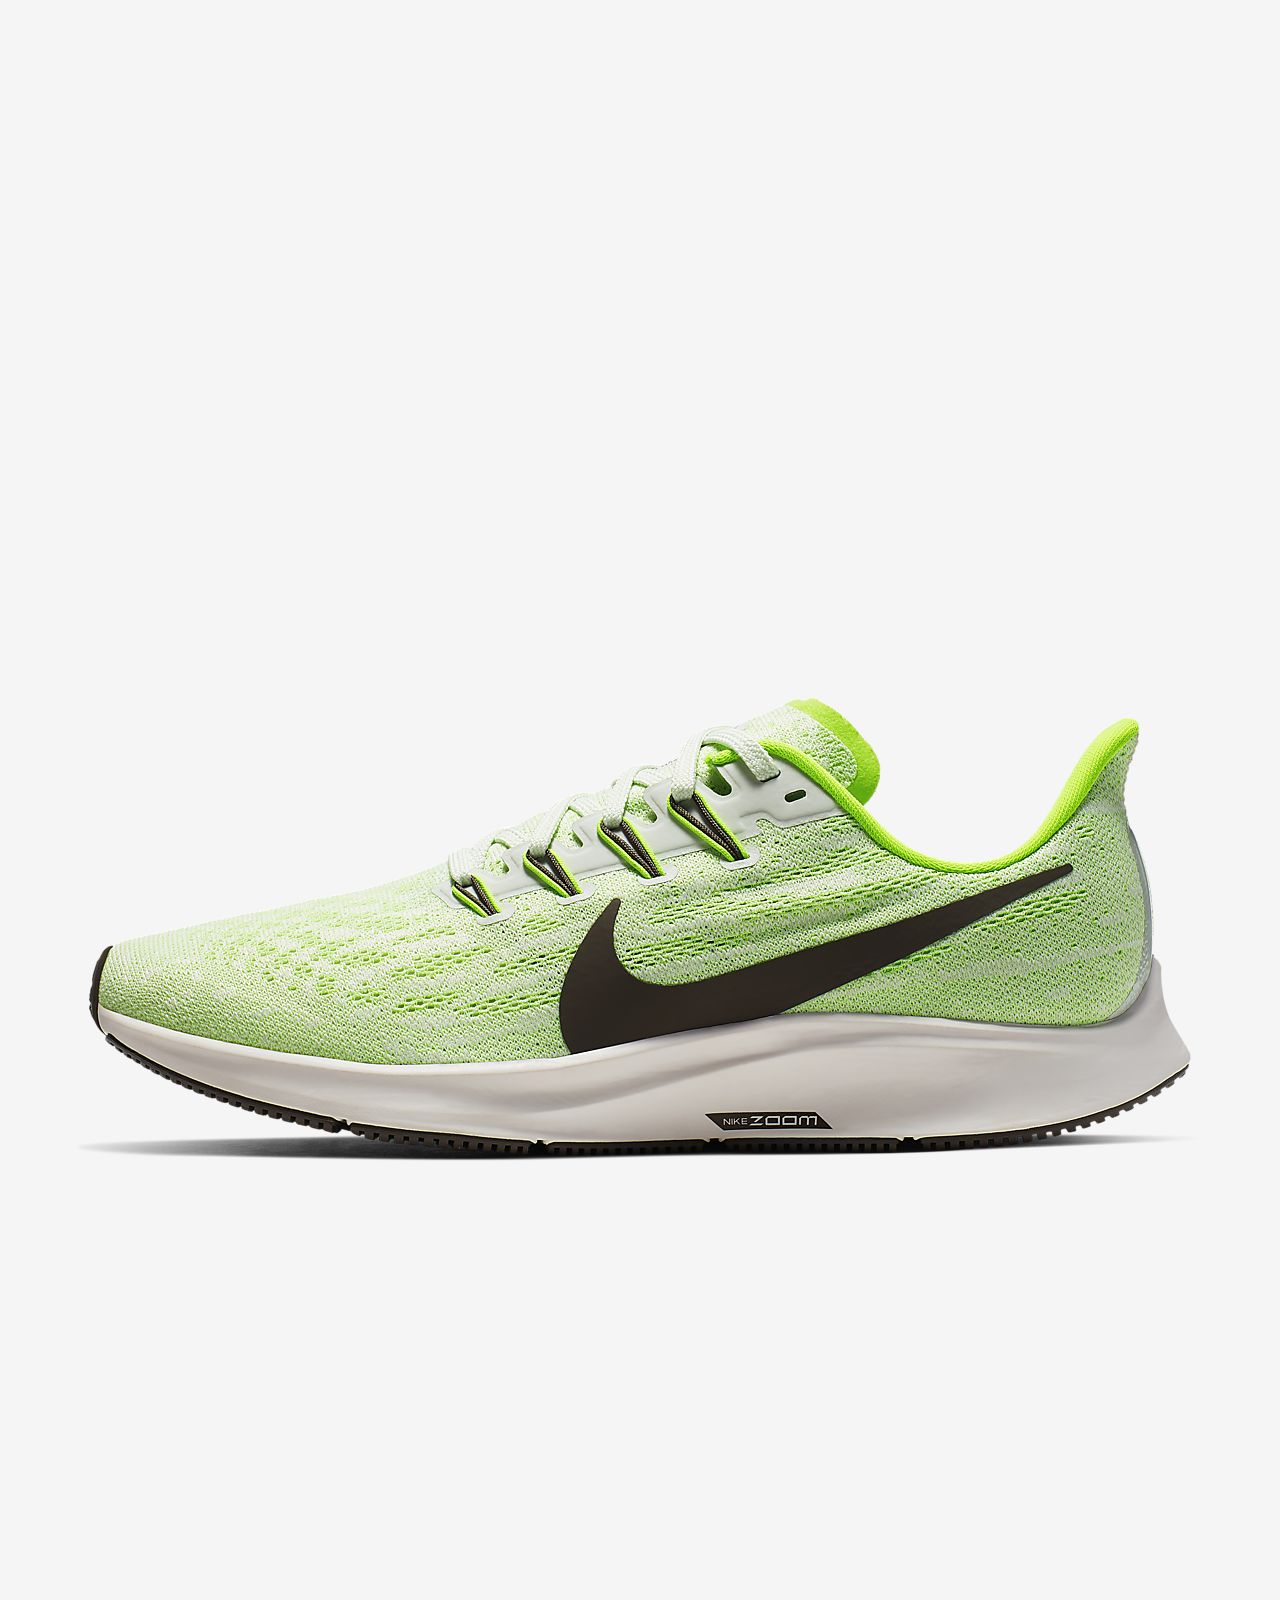 nike running air zoom pegasus 36 in green and white